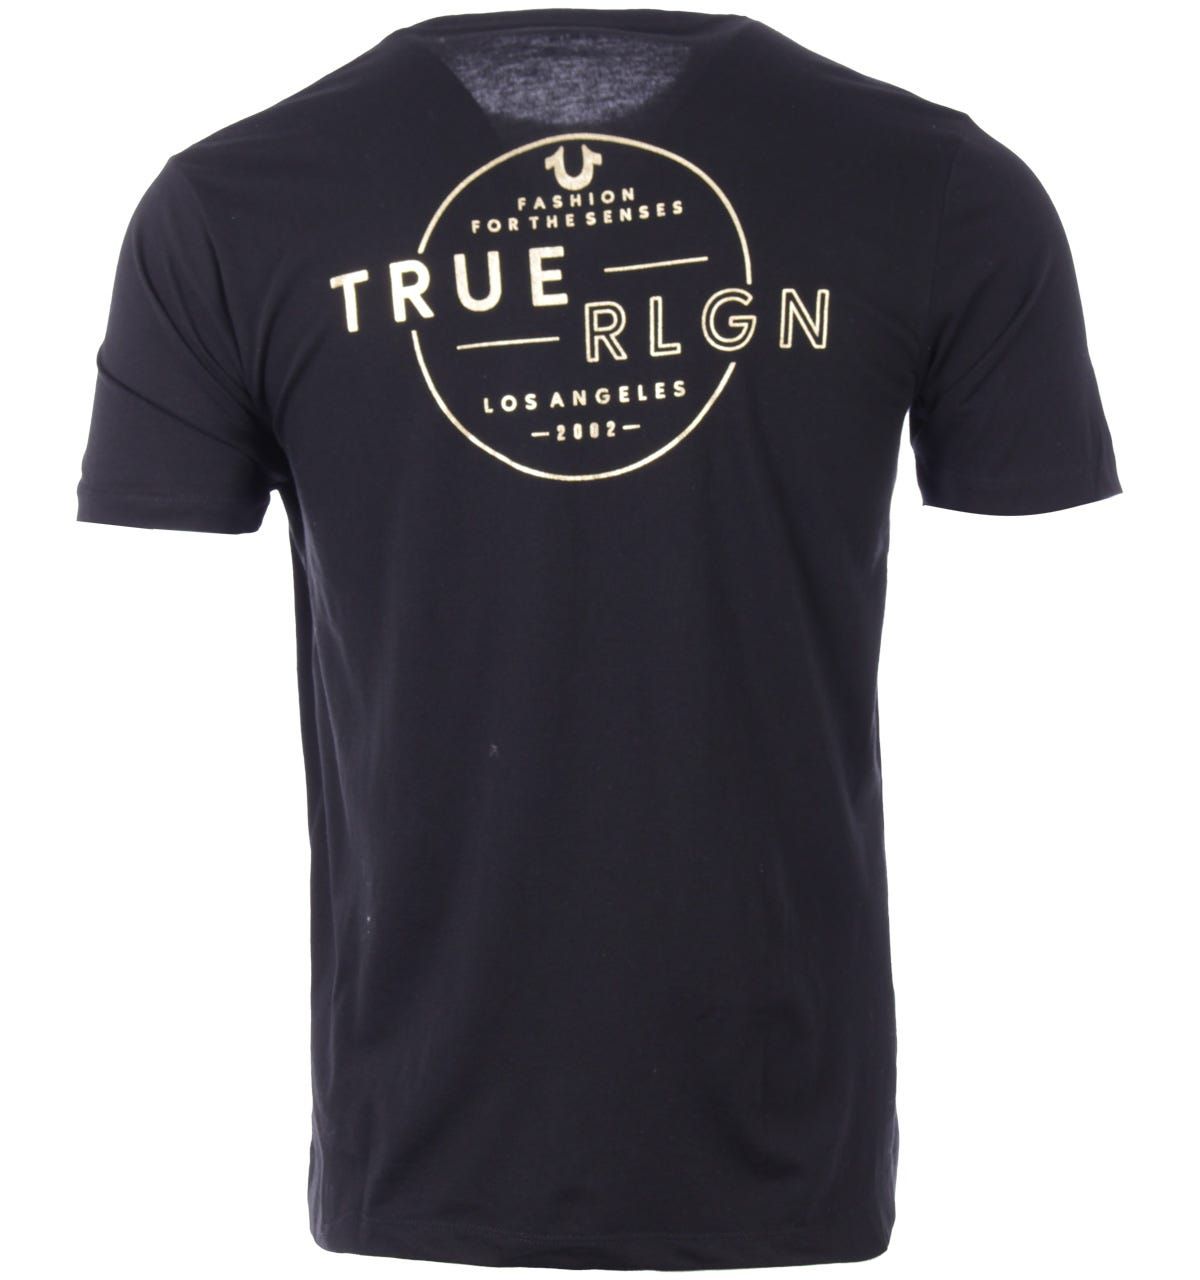 Founded in L.A back in 2002, True Religion have become global denim experts who have redesigned and reinvented the traditional five pocket jean. They quickly became known for quality craftsmanship, bold designs and the iconic lucky horseshoe logo. The perfect logo tee for every season. Crafted from a super soft cotton blend, providing comfort and breathability, featuring a classic crew neck design with a True Religion graphic logo printed to the back and the iconic horseshoe logo printed at the chest. Regular Fit, Cotton Blend Jersey, Ribbed Crew Neck, Logo Print Front & Back, Short Sleeves, True Religion Branding. Style & Fit: Regular Fit, Fits True to Size. Composition & Care: 60% Cotton, 40% Polyester, Machine Wash.